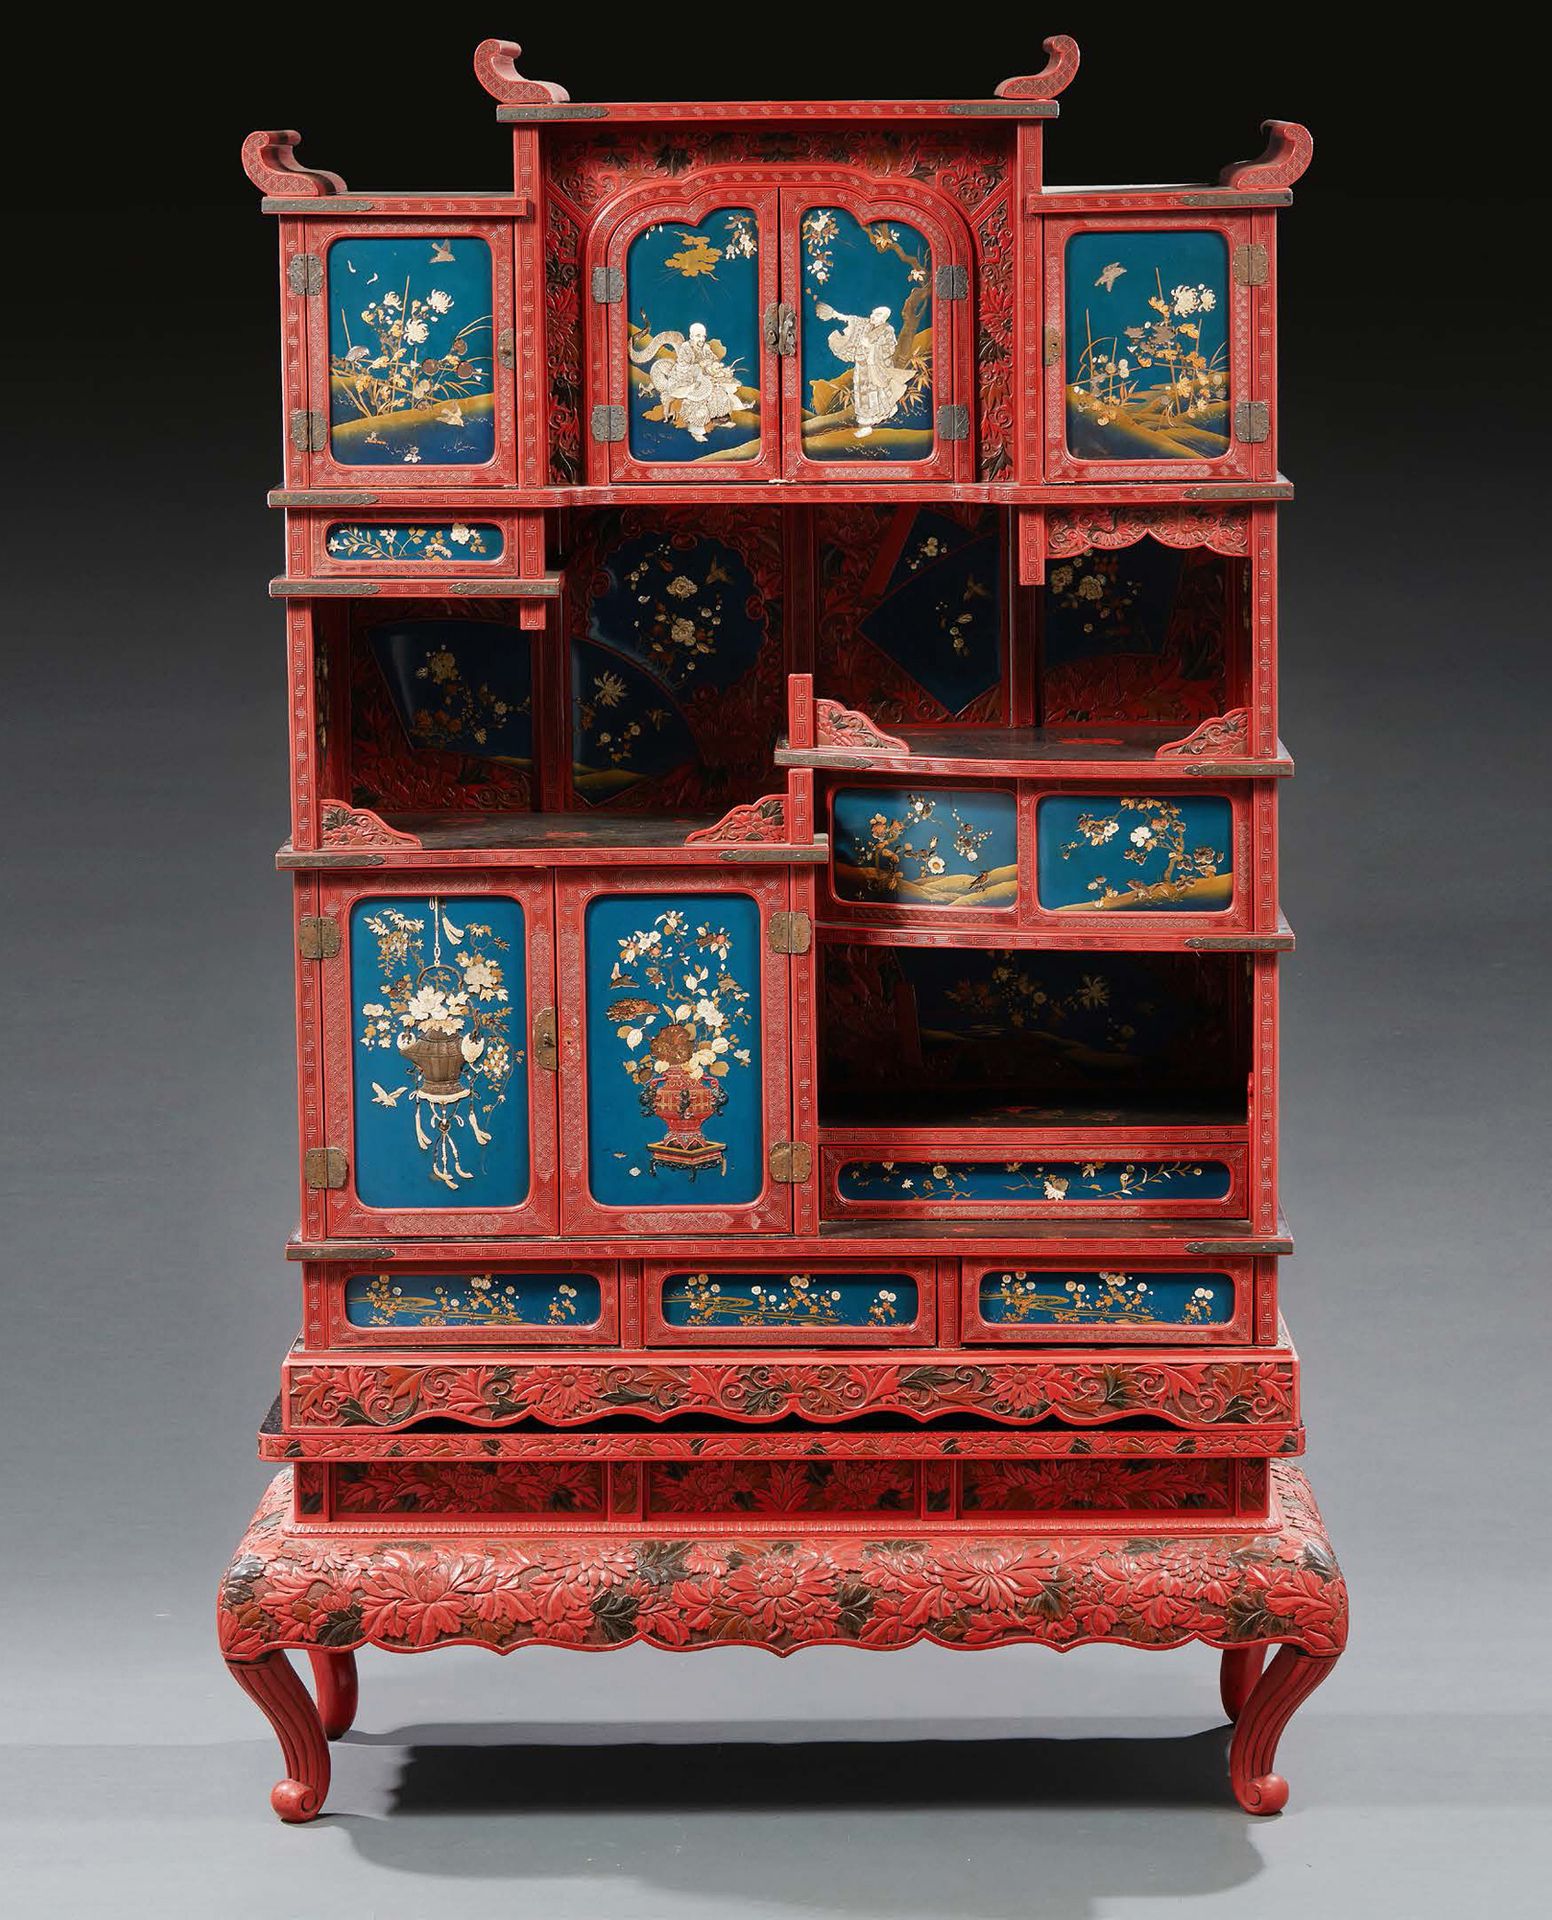 JAPON A cinnabar lacquer kazaridana cabinet with floral and lattice motifs. The &hellip;